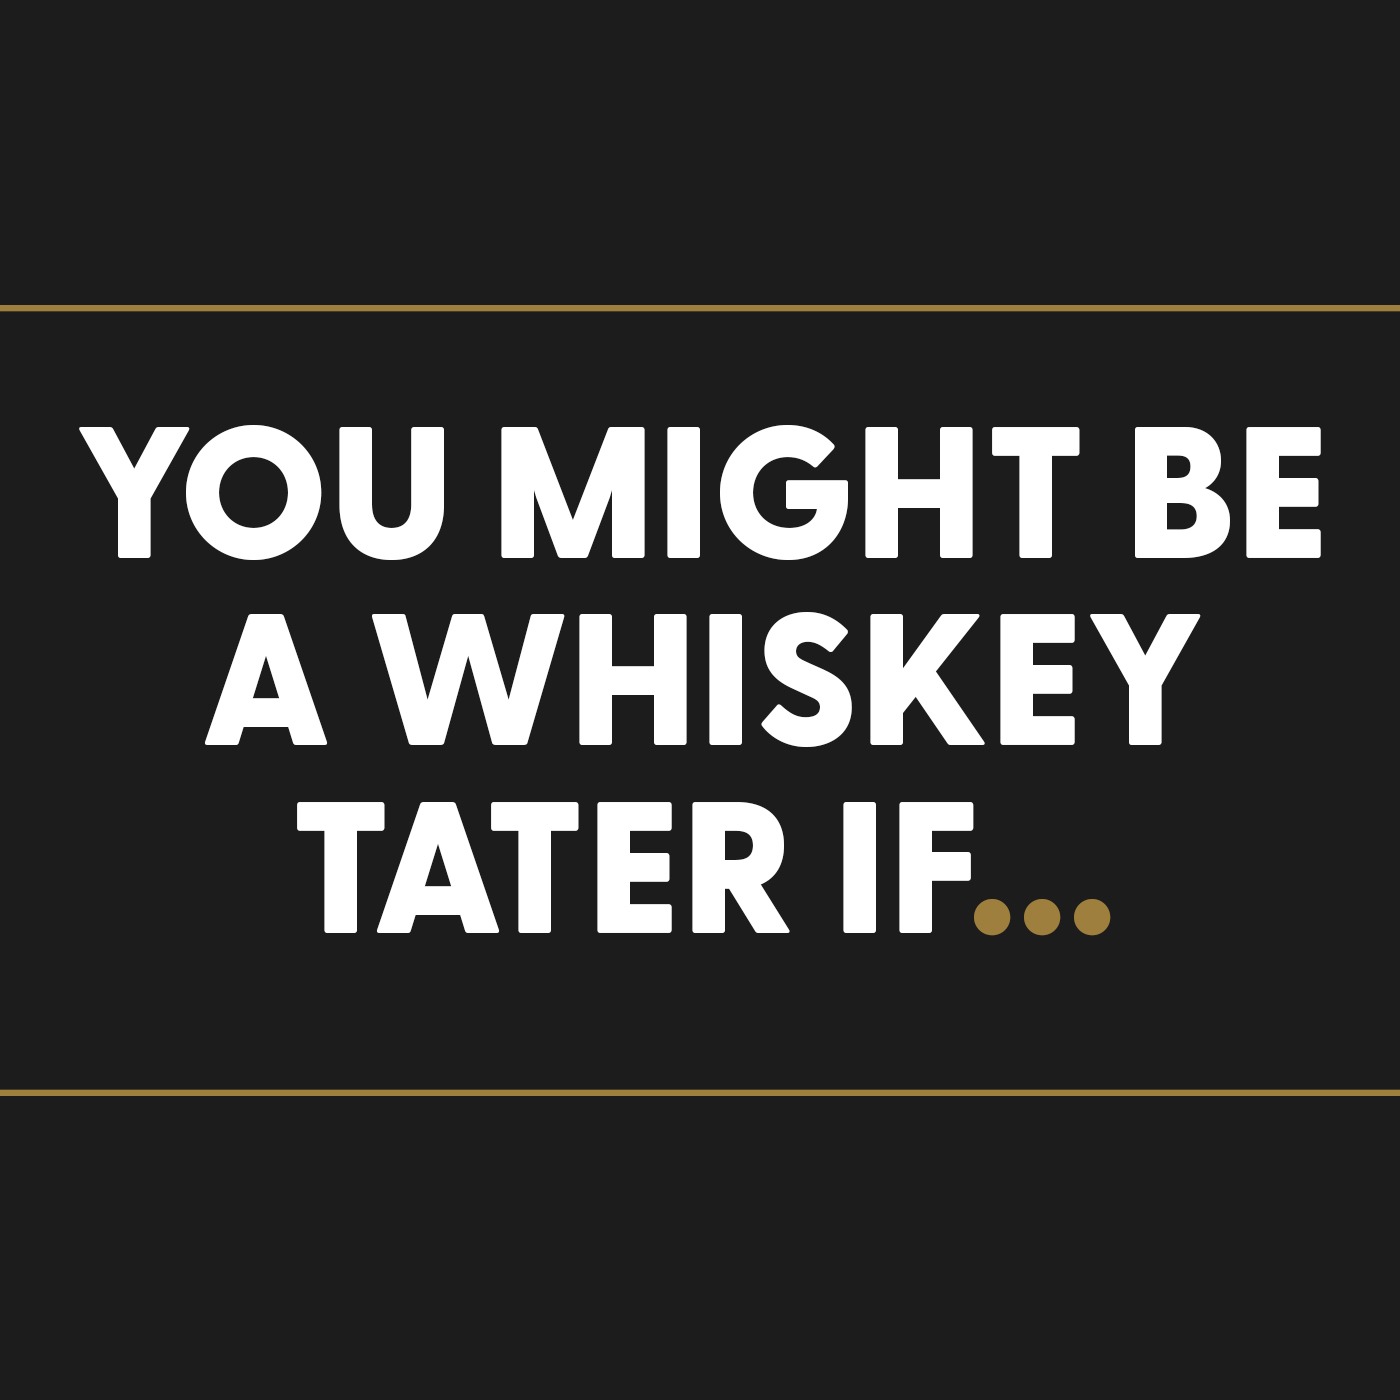 Top 12 Signs You Might be a Whiskey Tater